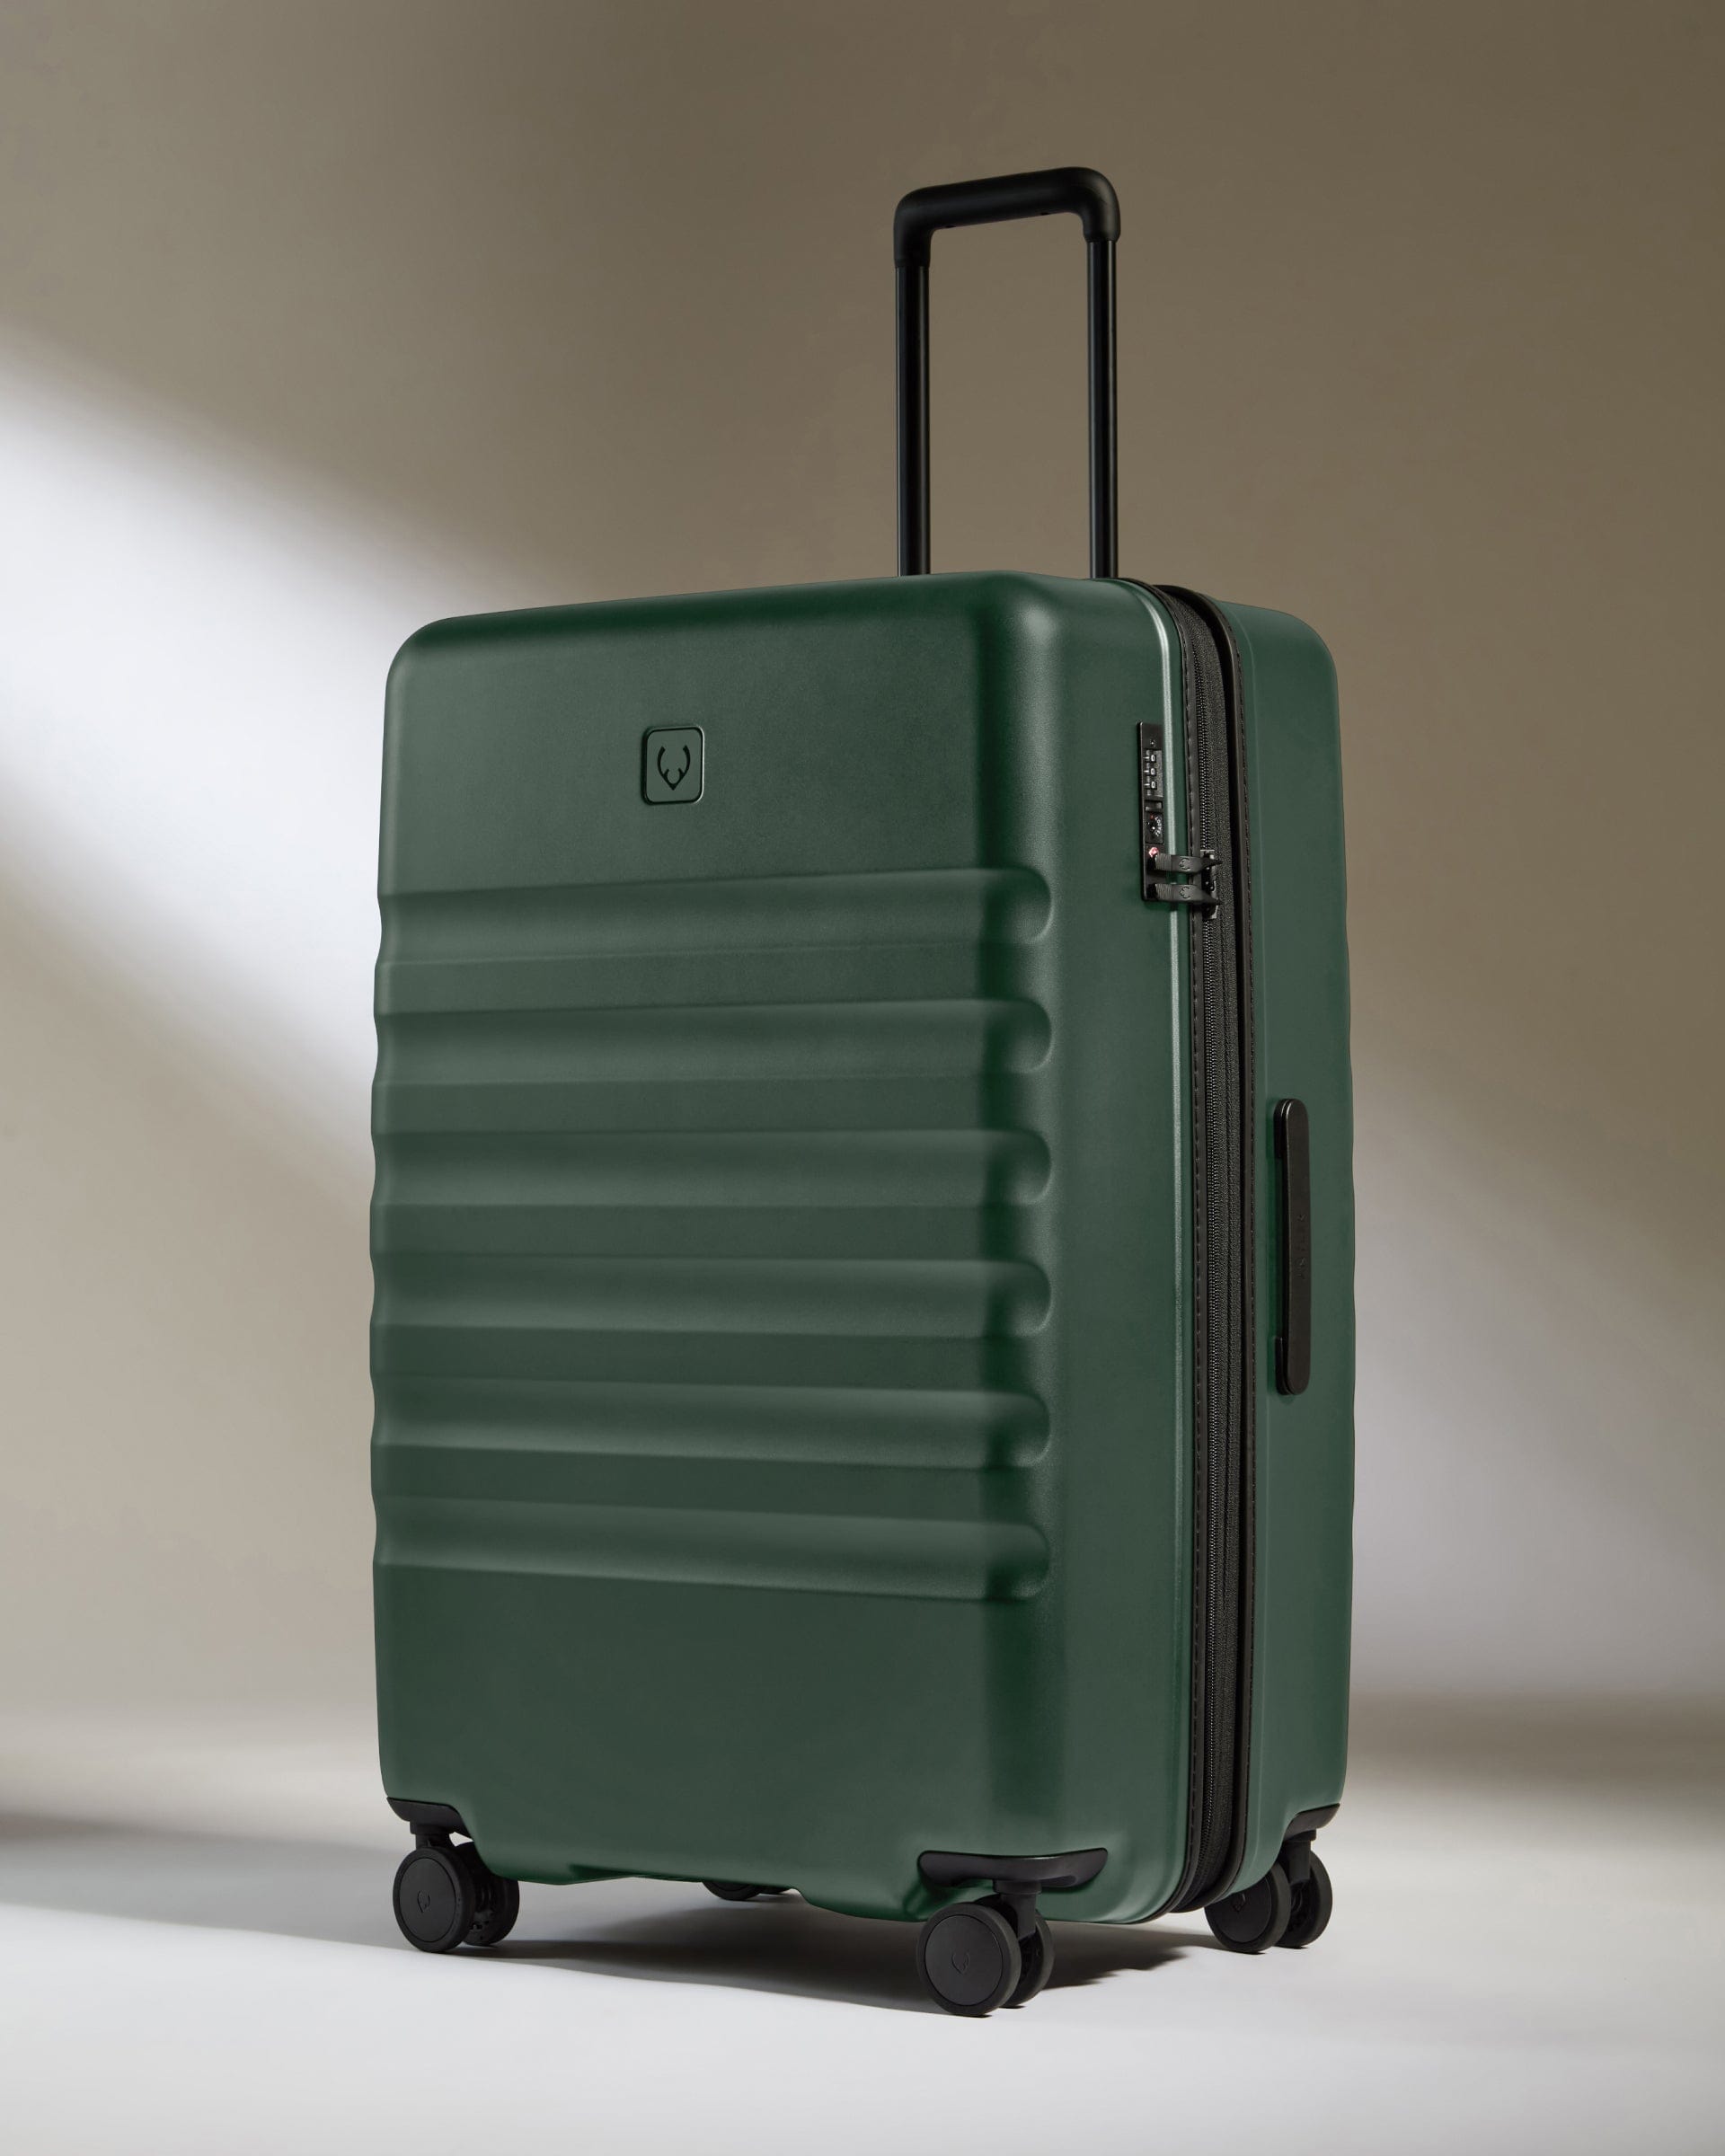 View Icon Stripe Large Suitcase In Antler Green Size 336cm x 78cm x 517cm information